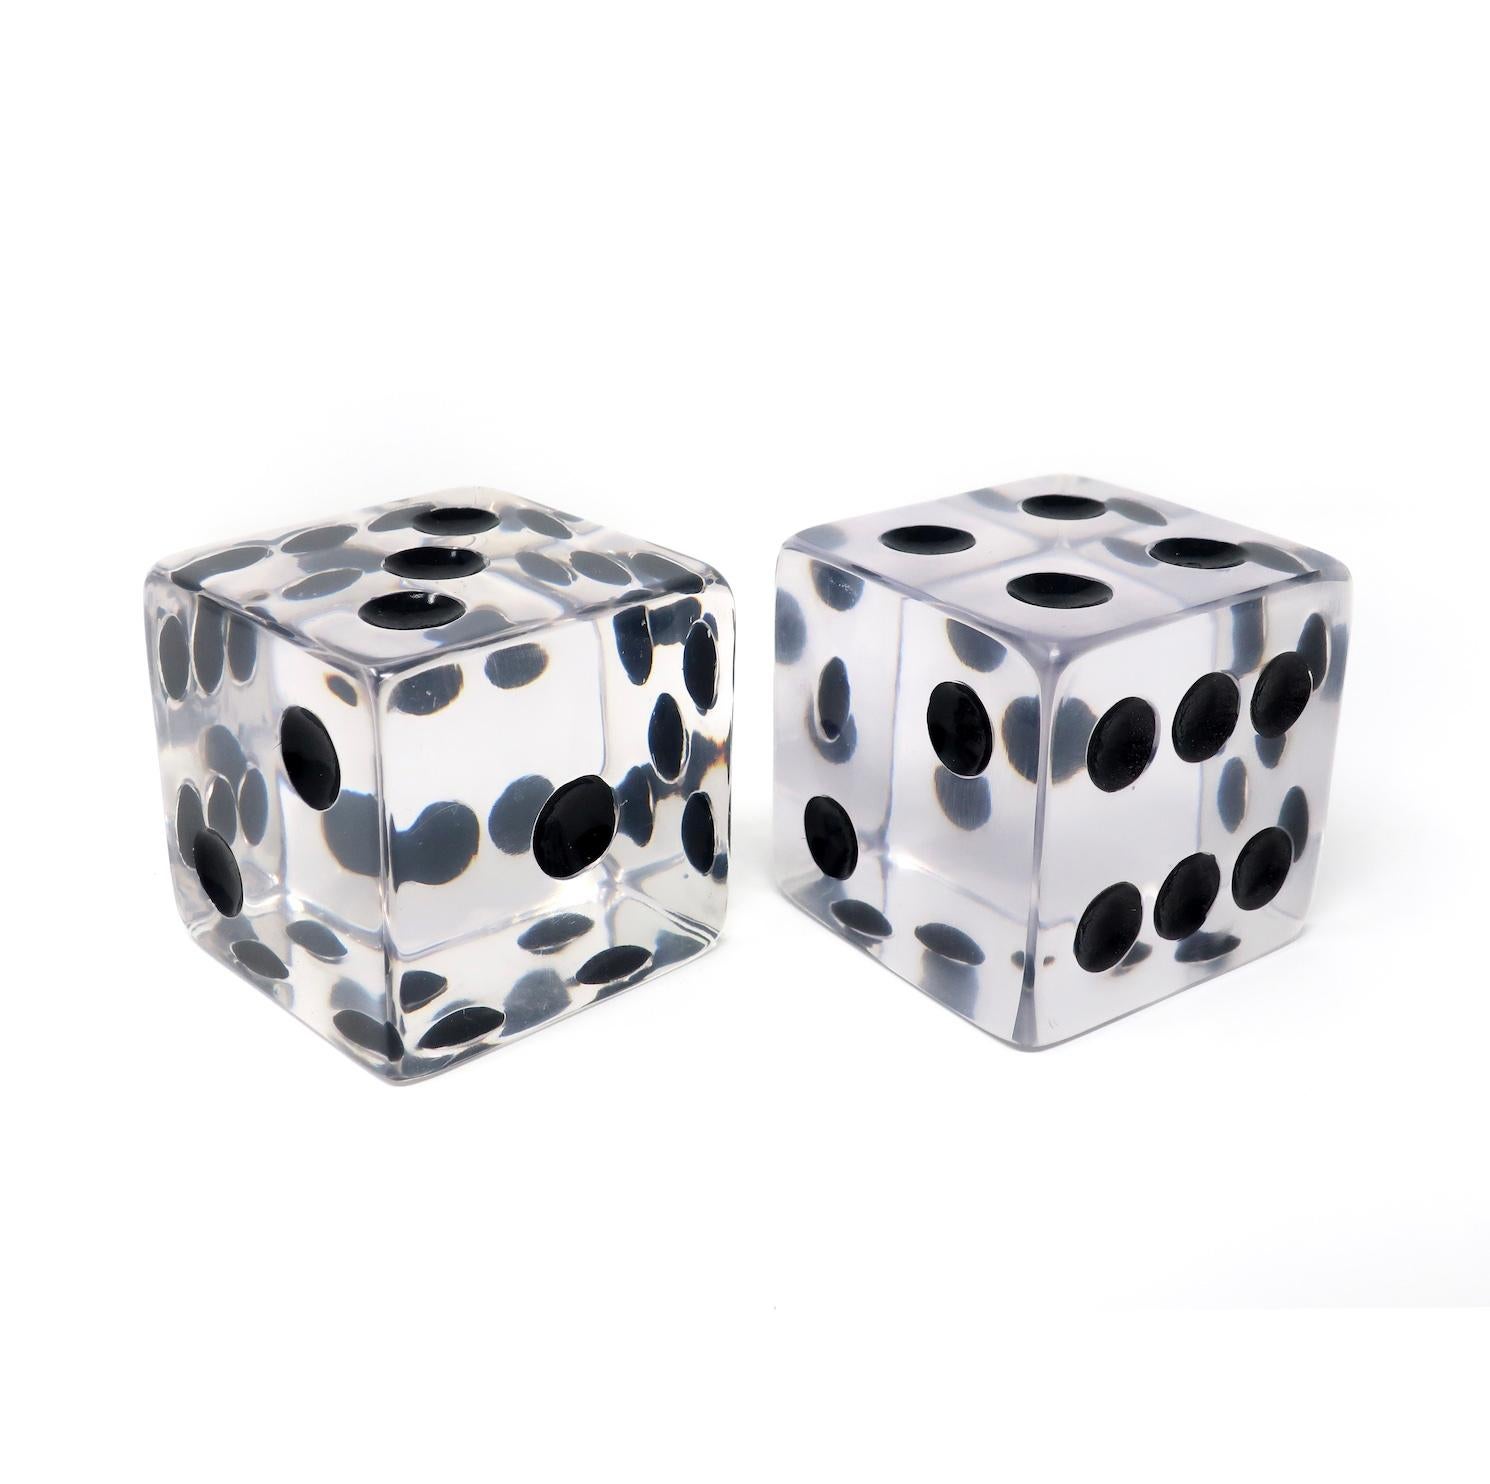 A pair of oversized Lucite dice in the style of Charles Hollis Jones. Heavy enough to use as bookends or paperweights and striking enough to be a lovely decorative object. Clear acrylic with black dots.

In very good vintage condition with light